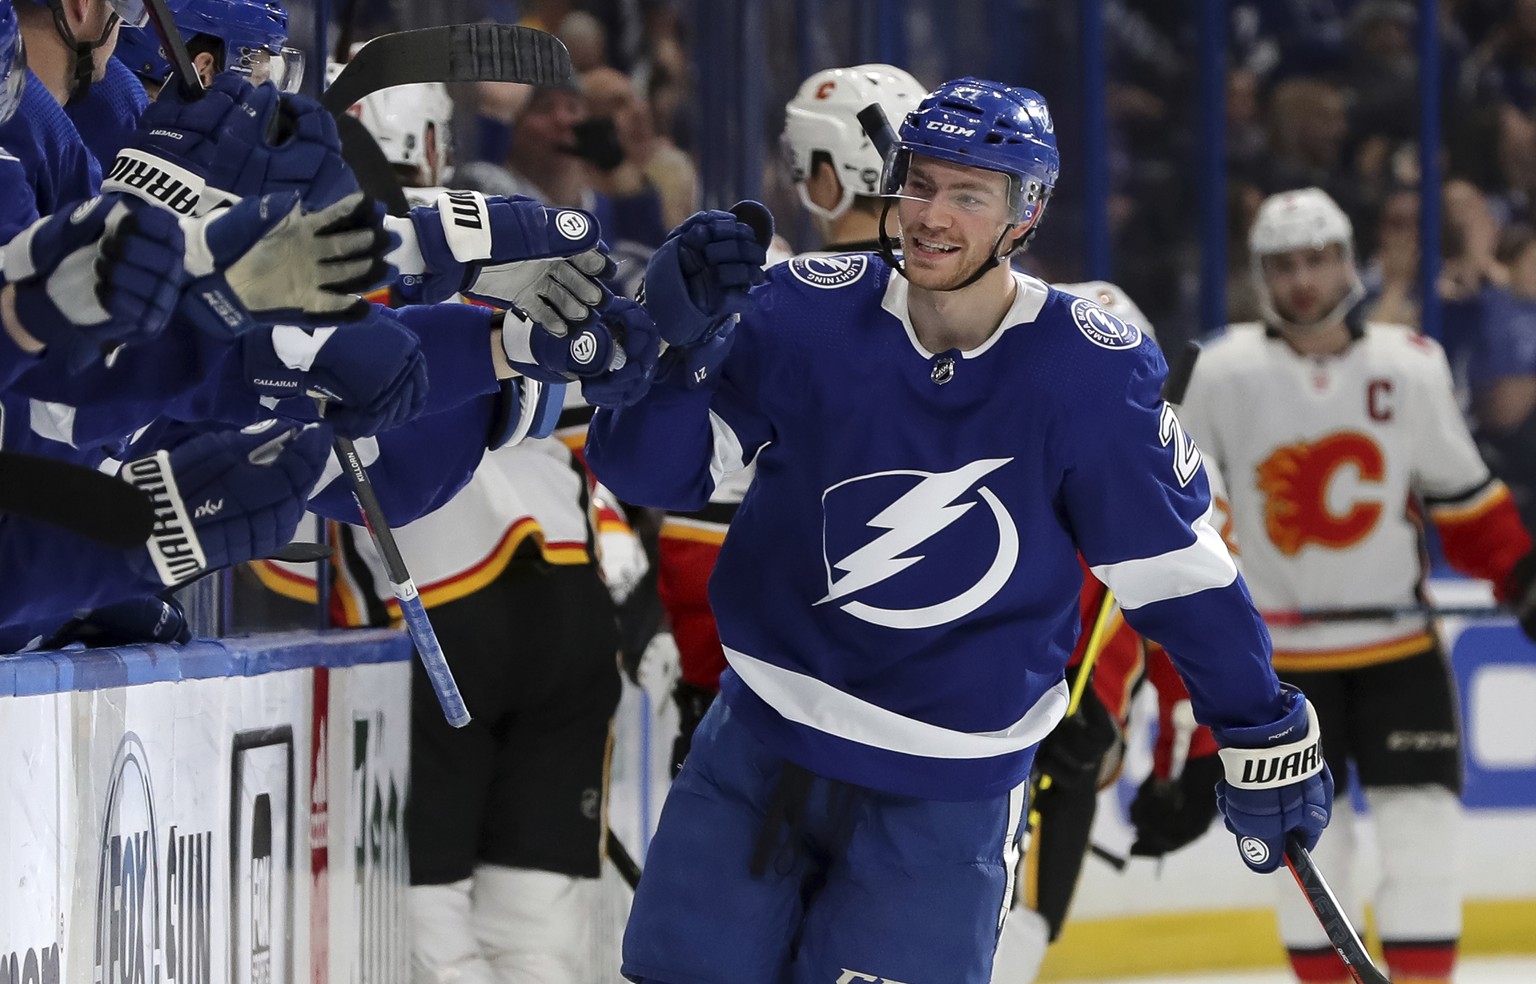 Tampa Bay Lightning&#039;s Brayden Point celebrates his goal against the Calgary Flames during the first period of an NHL hockey game Tuesday, Feb. 12, 2019, in Tampa, Fla. (AP Photo/Mike Carlson)